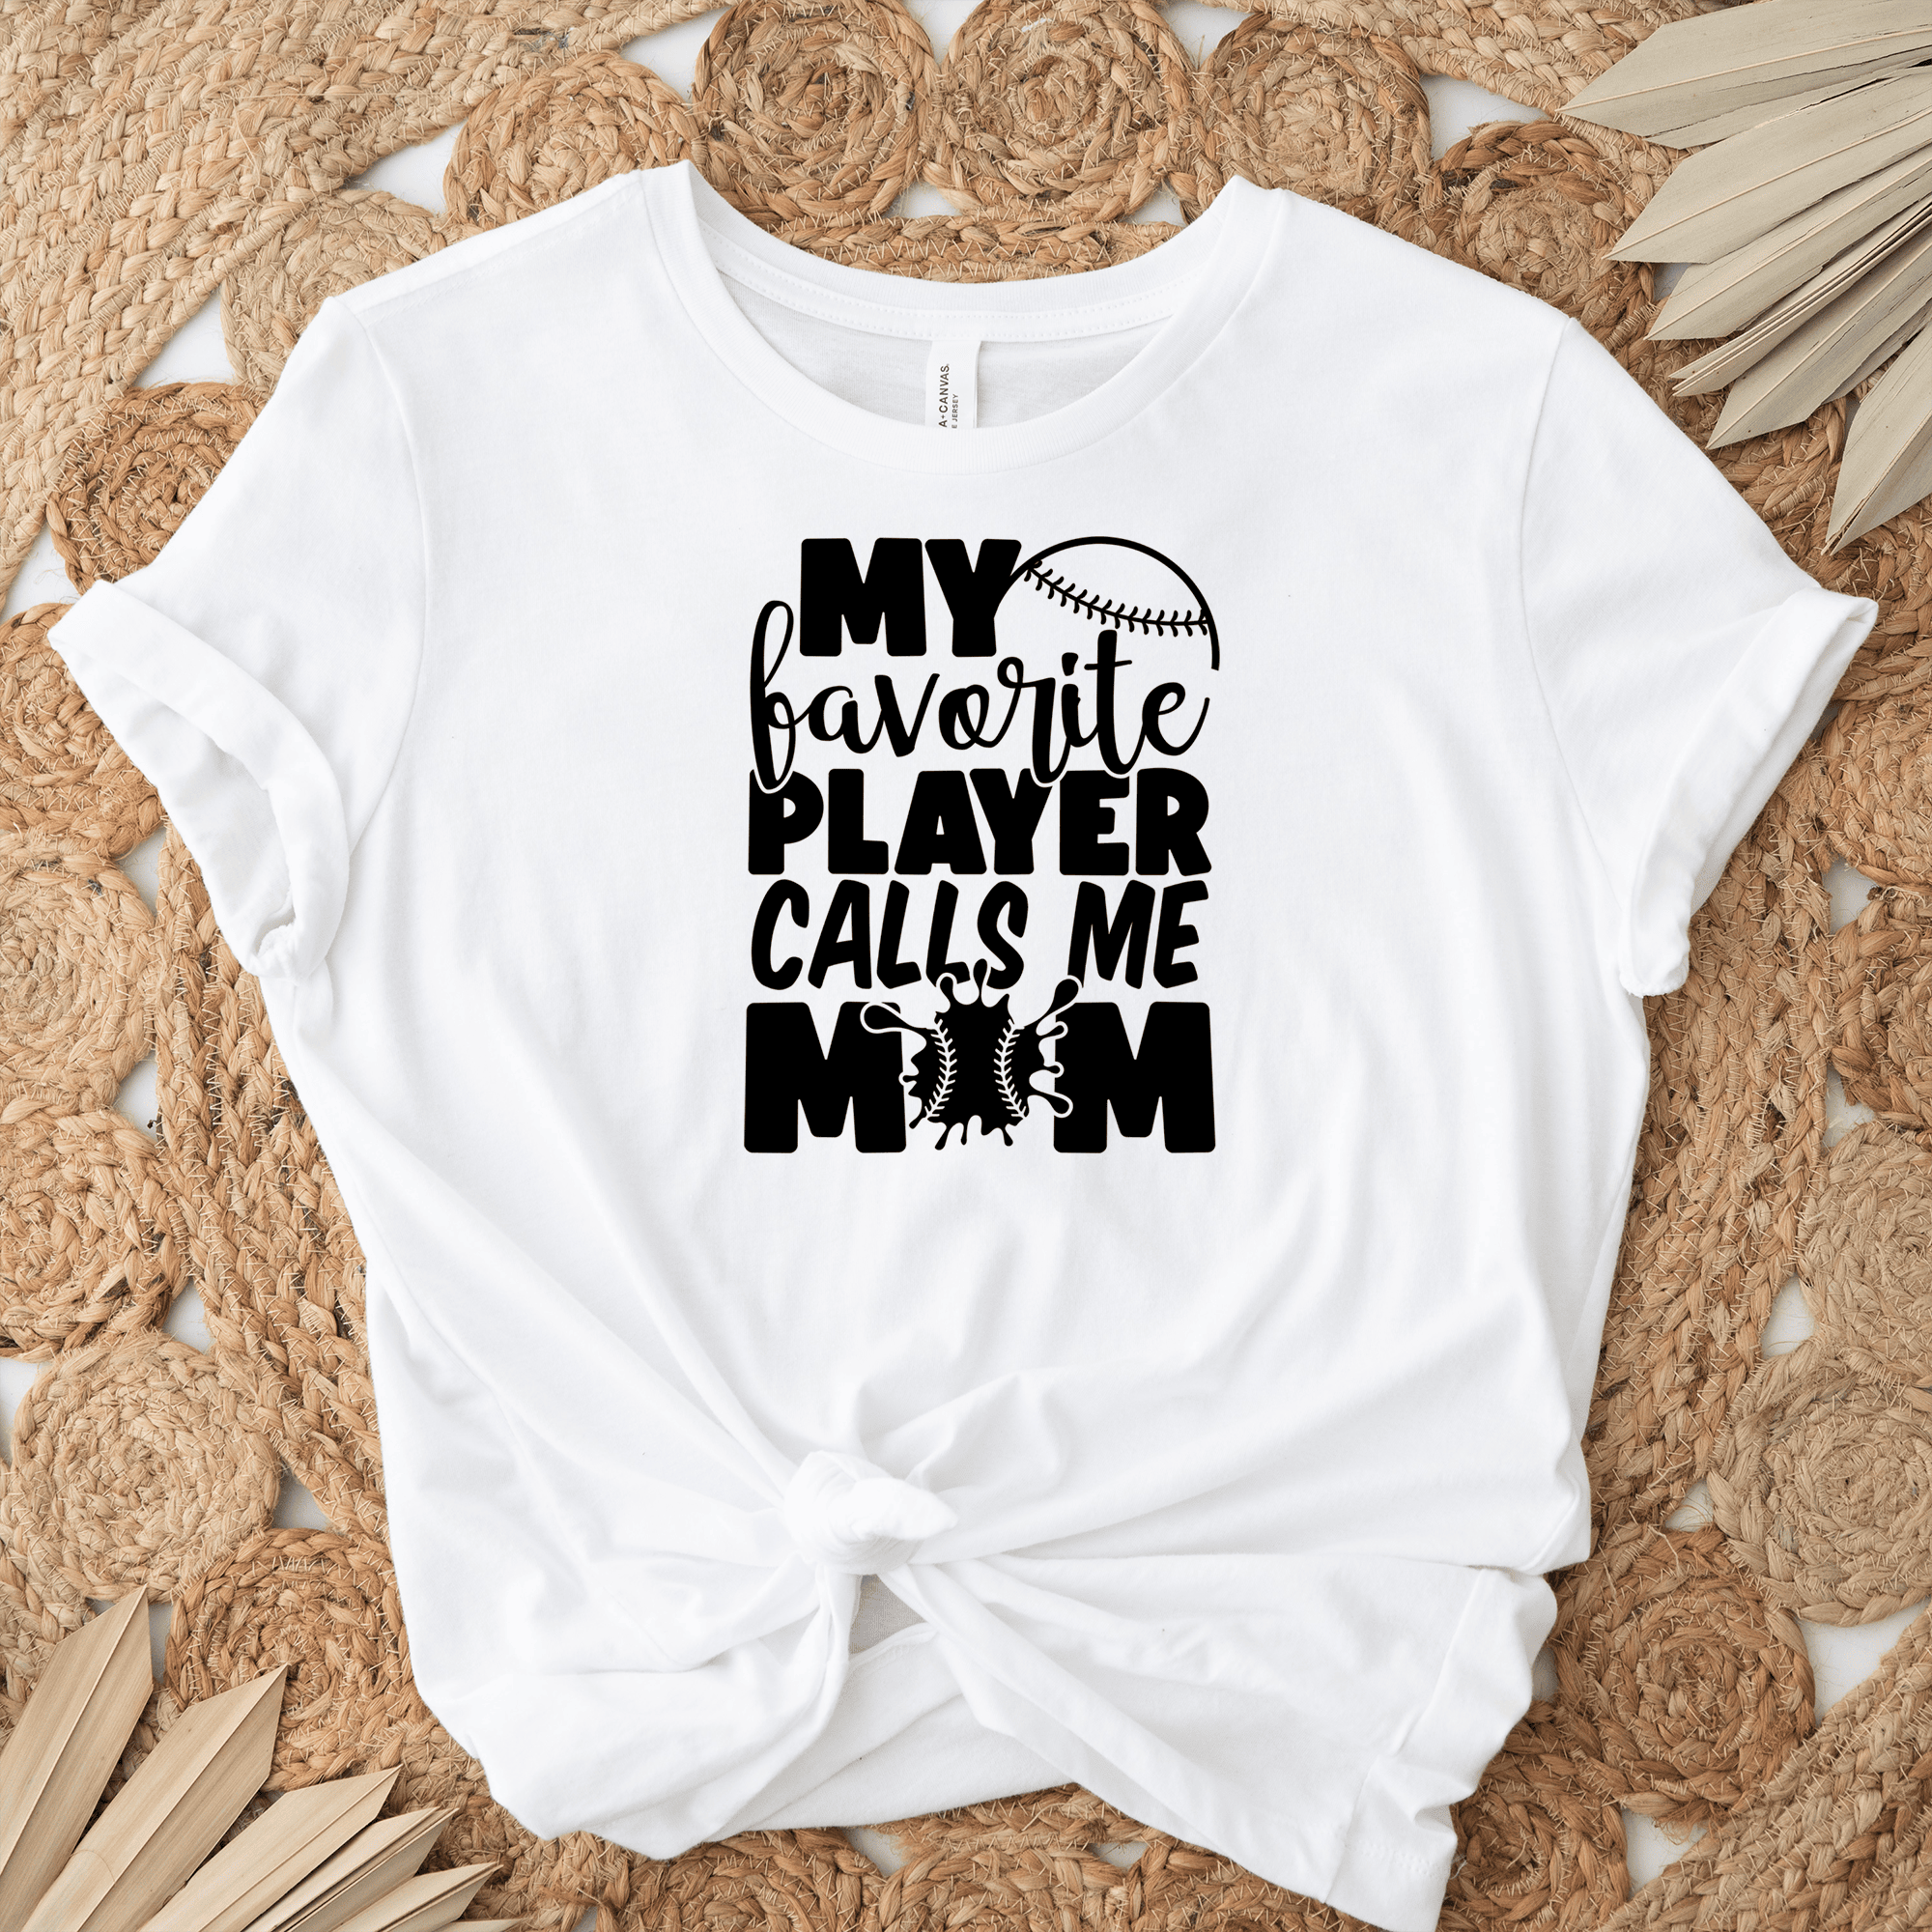 Womens White T Shirt with My-Favorite-Player-Calls-Me-Mom design